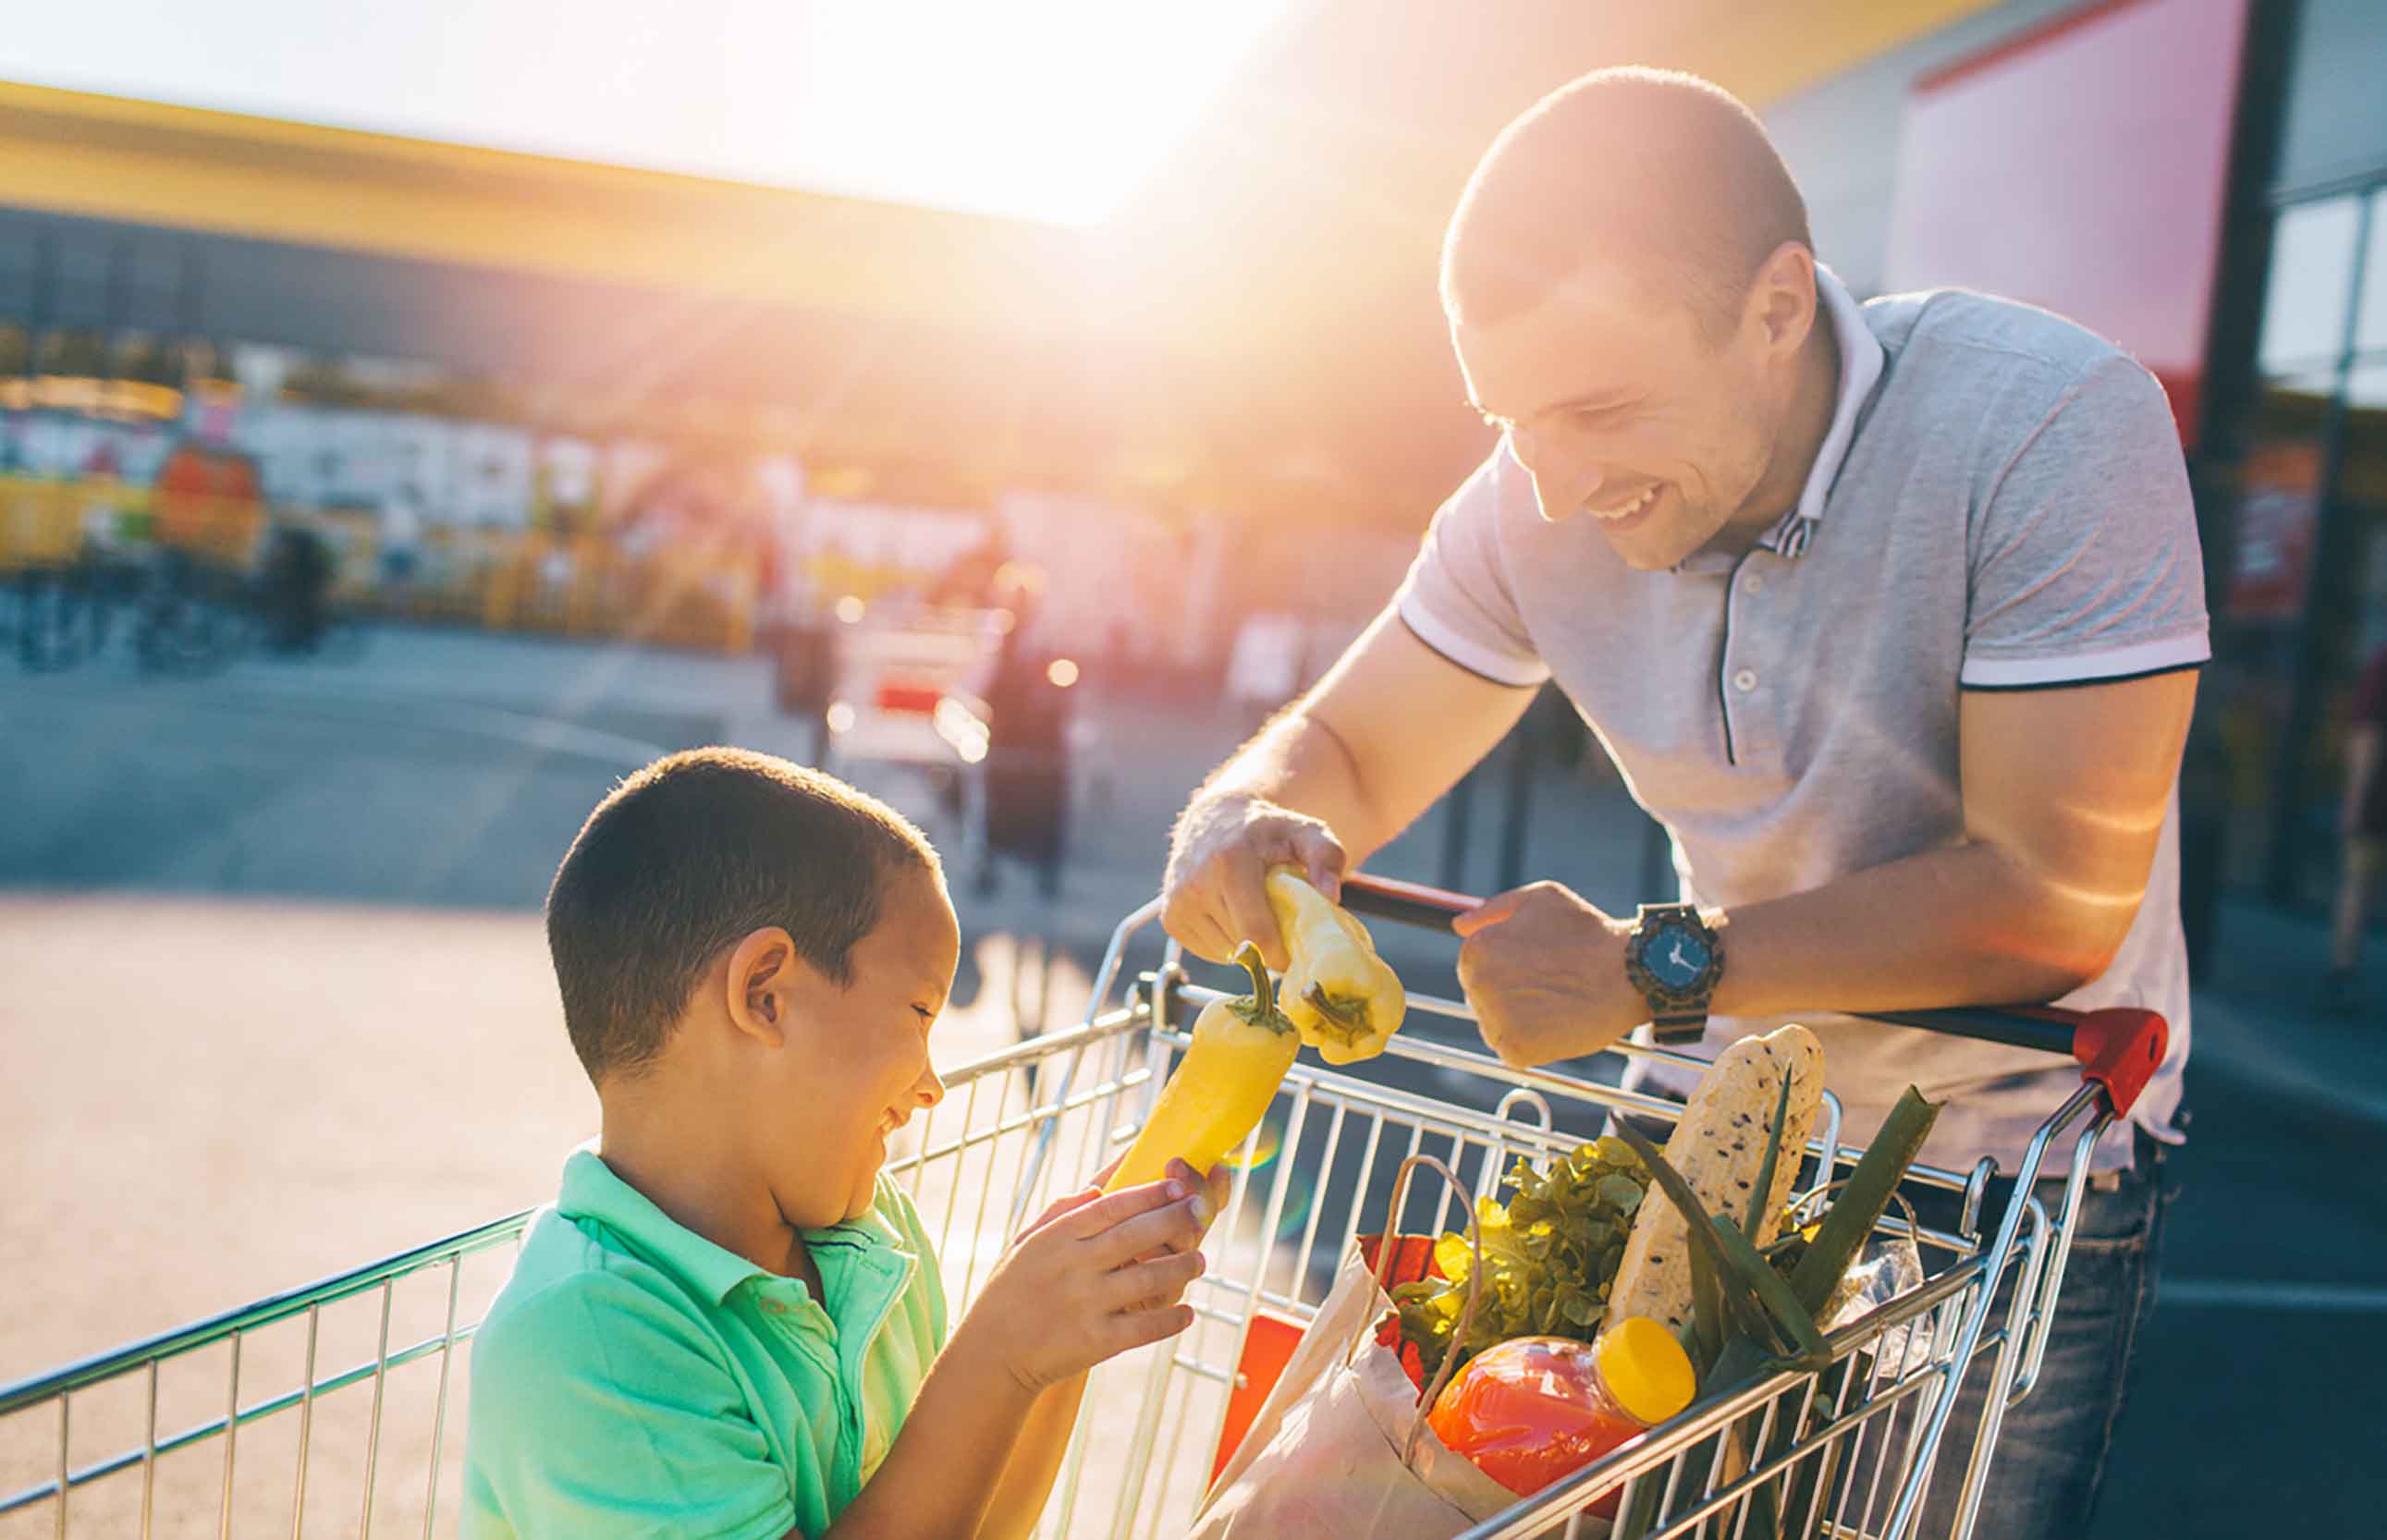 Groceries are an essential, but going way over budget isn't. Learning how to properly budget for groceries will save you a lot of time and money.